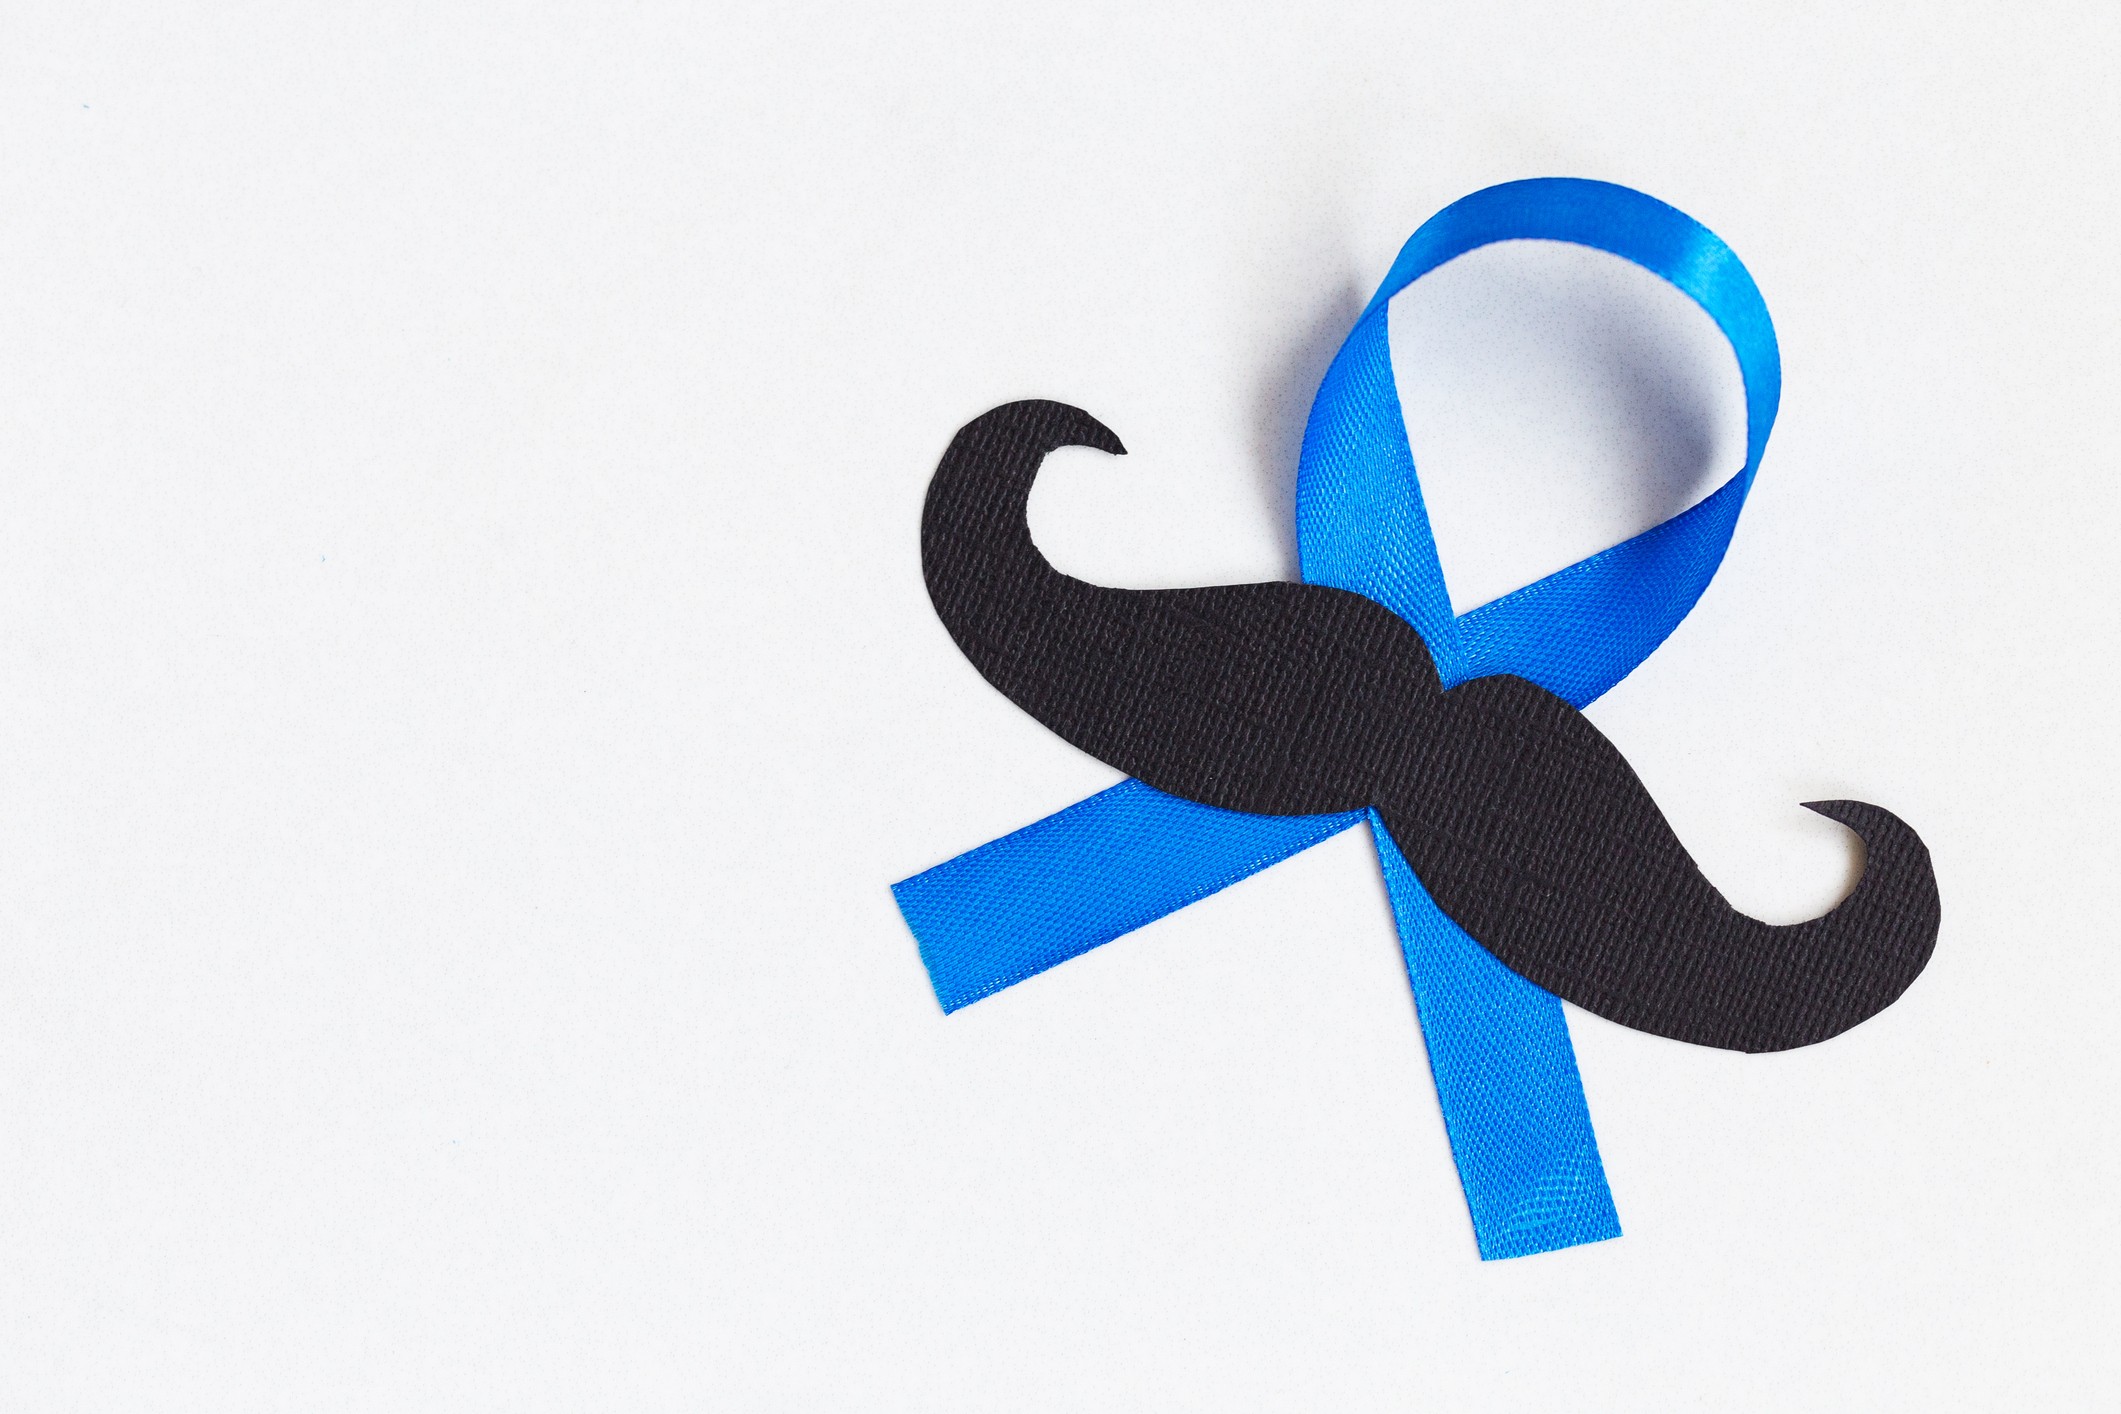 ‘Movember’ is a health awareness campaign where men grow their moustaches during the month of November to raise funds for prostate cancer research.